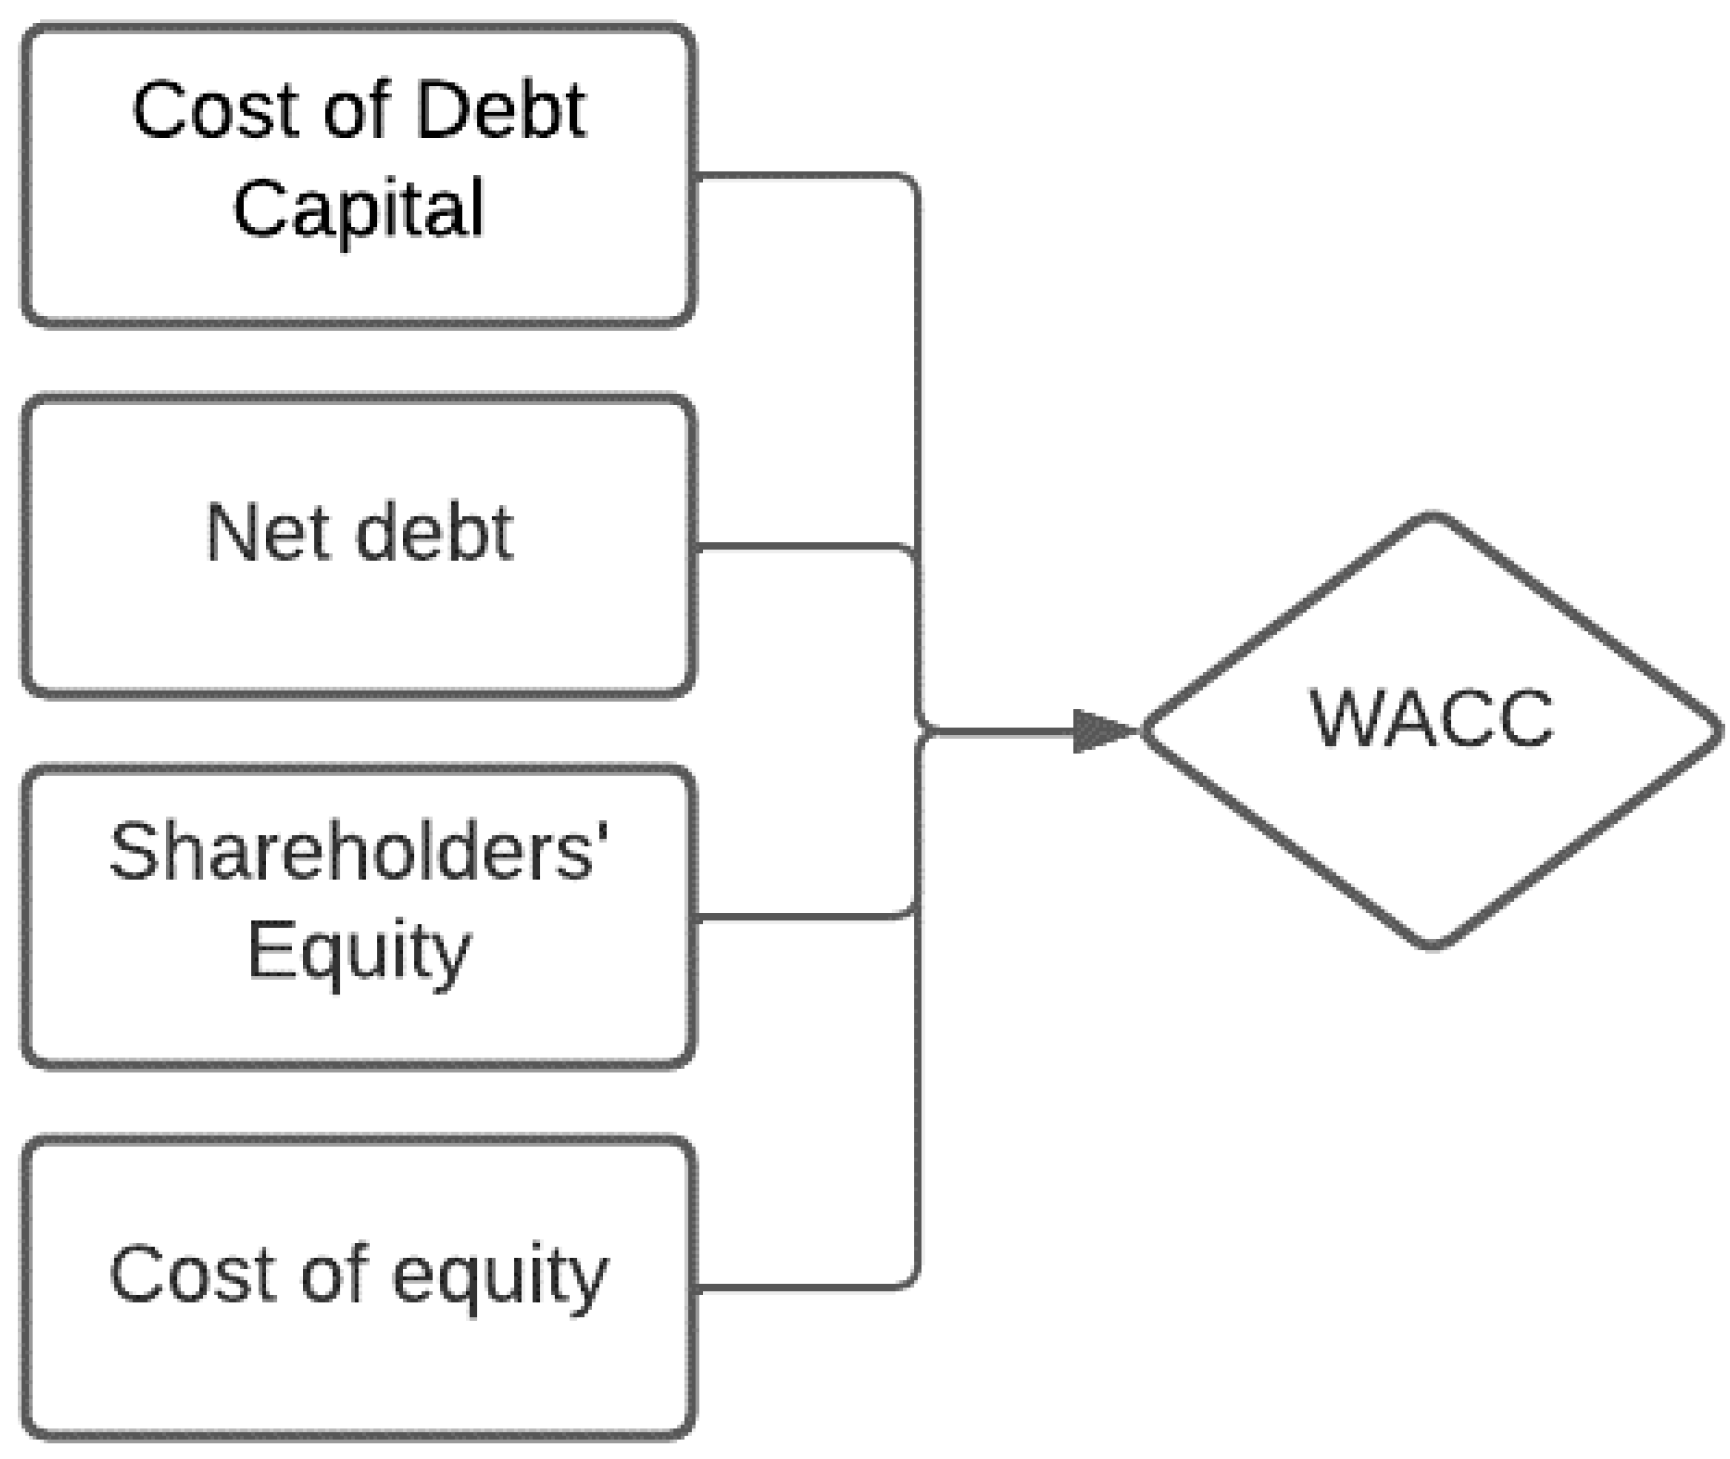 4 Innovative Methods To Calculate WACC (Resourceful)